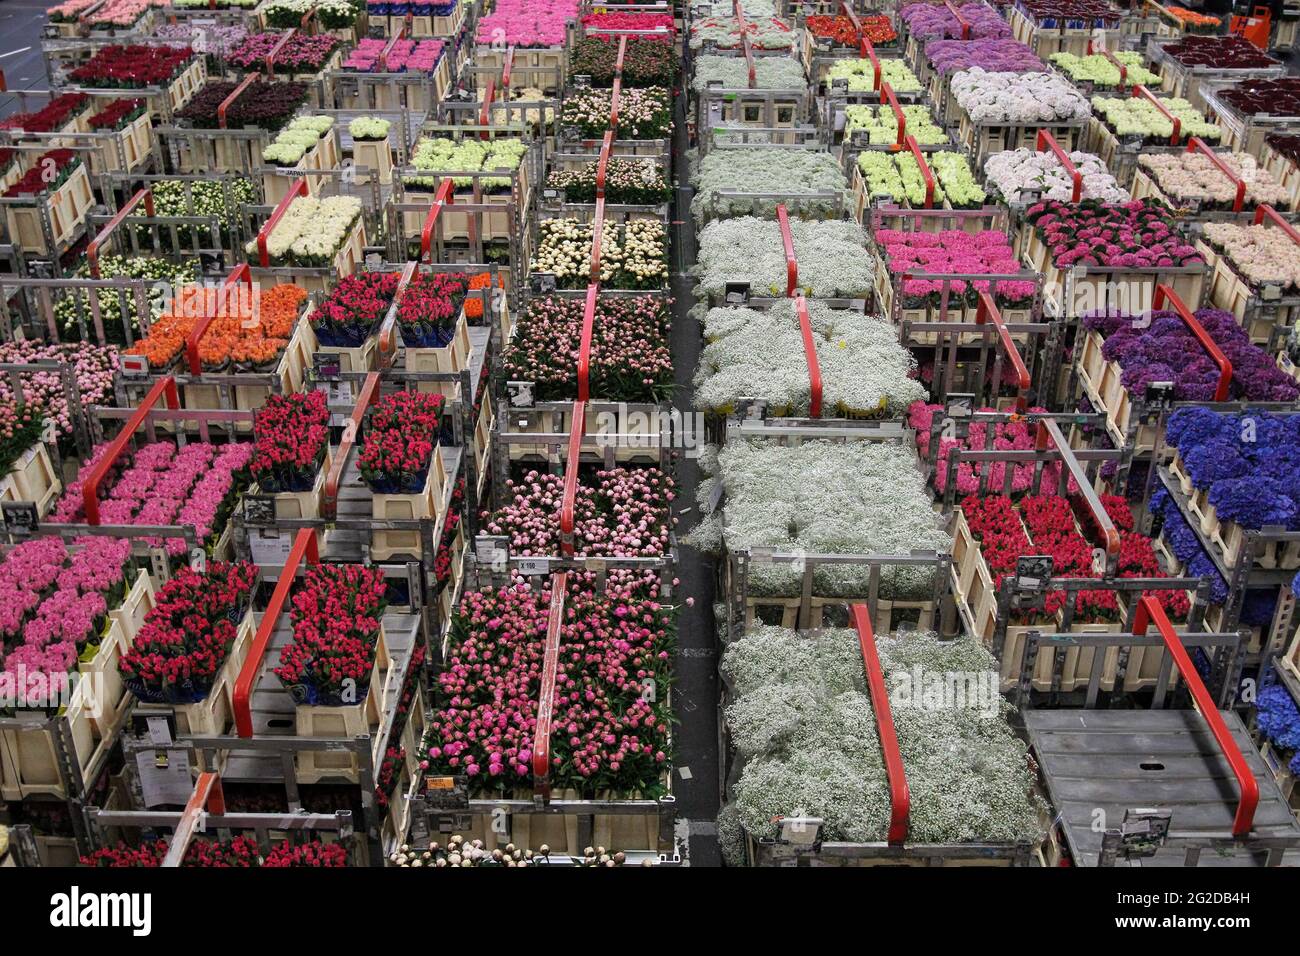 AALSMEER, NETHERLANDS - JUNE 6, 2011: Carts of variety of flowers staging at Aalsmeer FloraHolland auction market Stock Photo